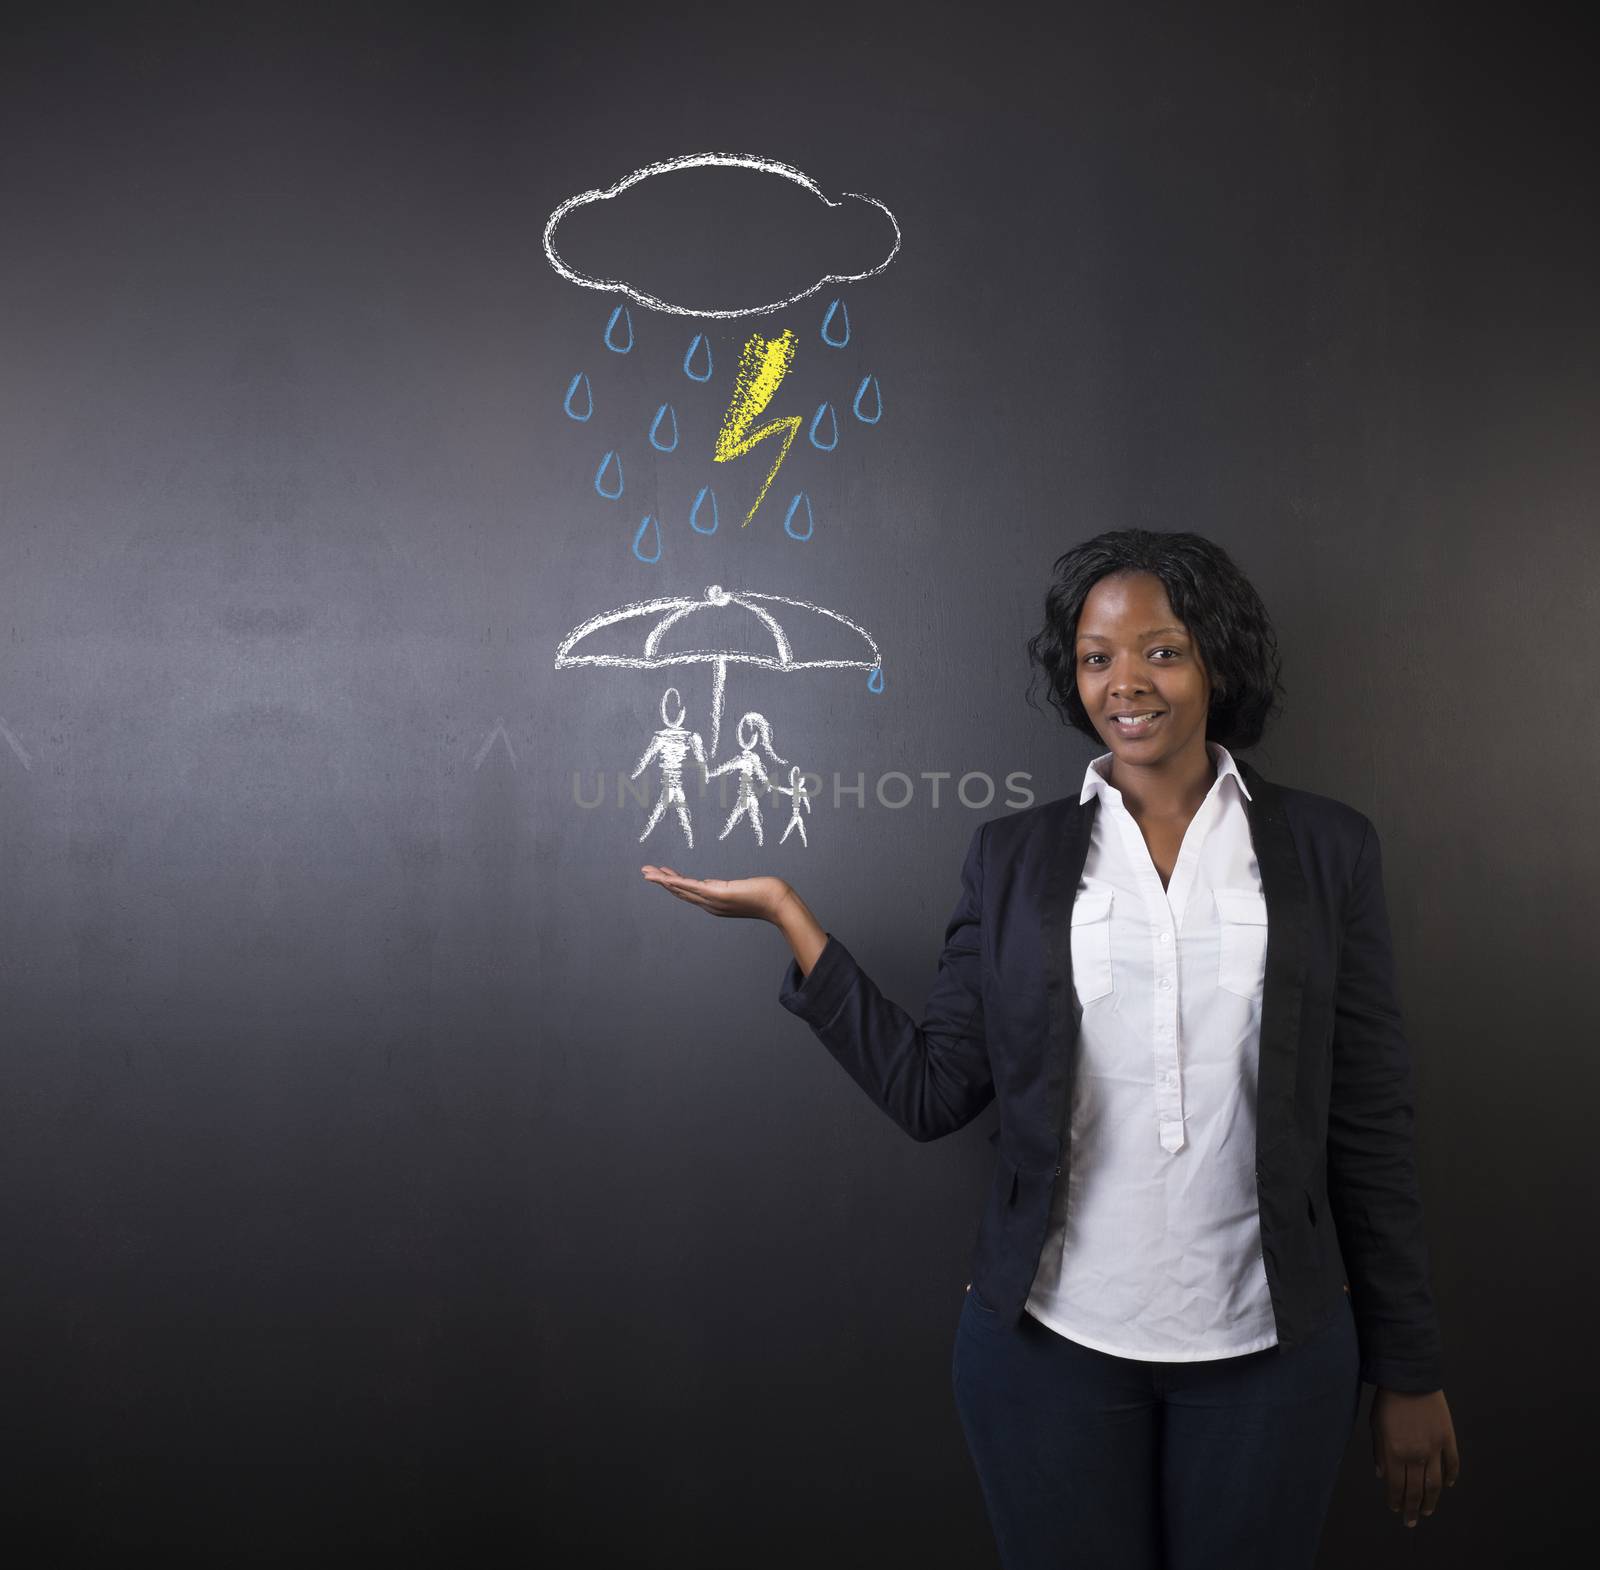 South African or African American woman teacher or student holding out her hand, displaying an insurance concept while thinking about protecting family from natural disaster on a blackboard background